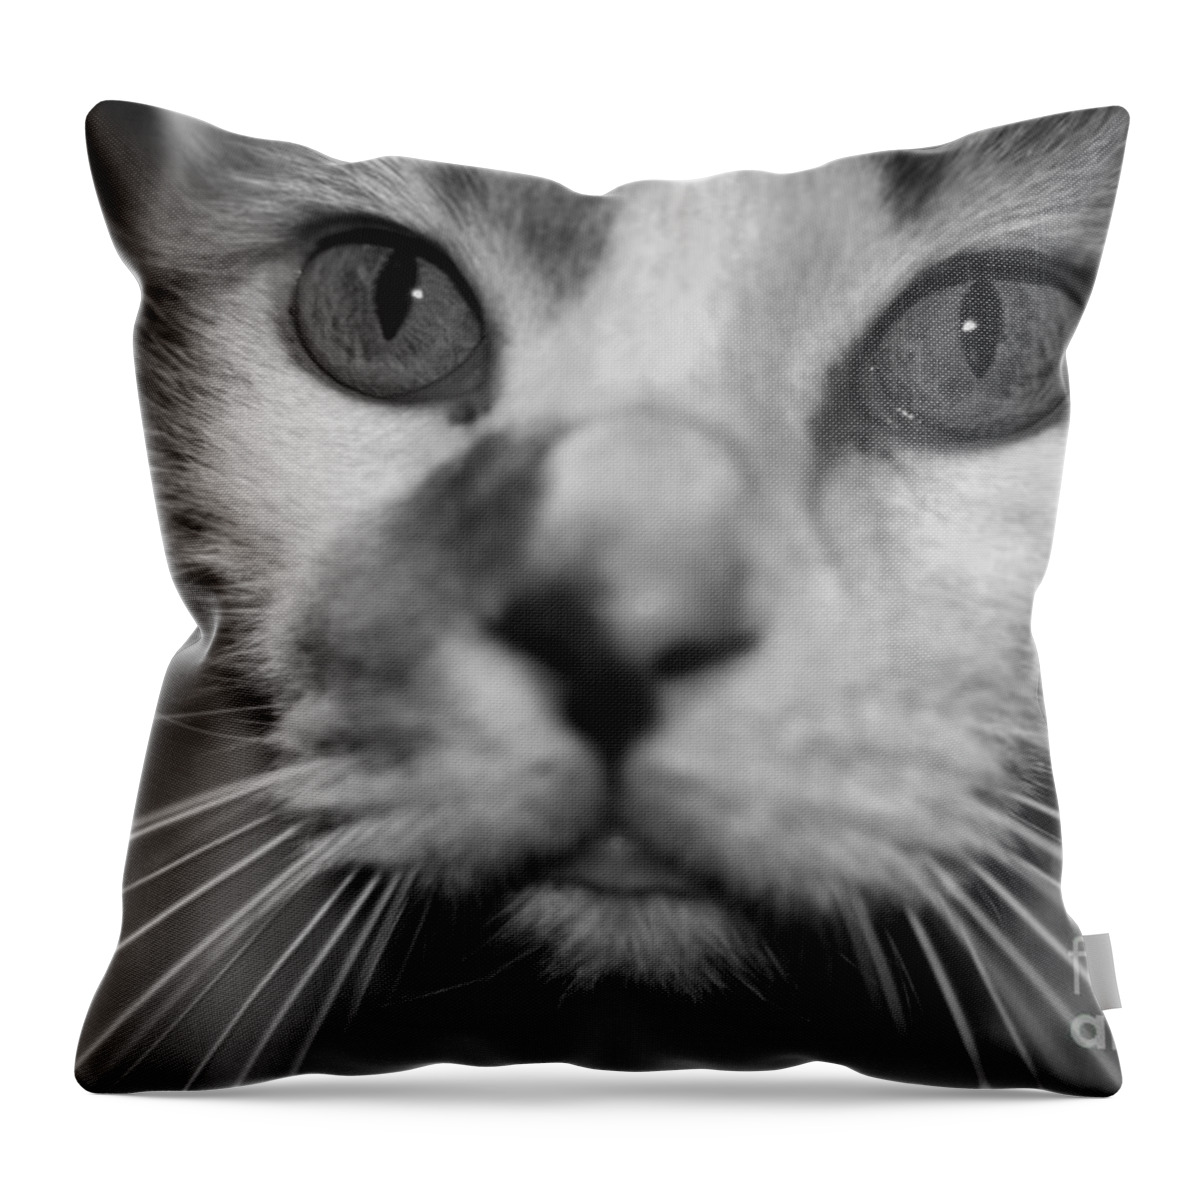 Close-up Throw Pillow featuring the photograph Look Into My Eyes #2 by Mark McReynolds